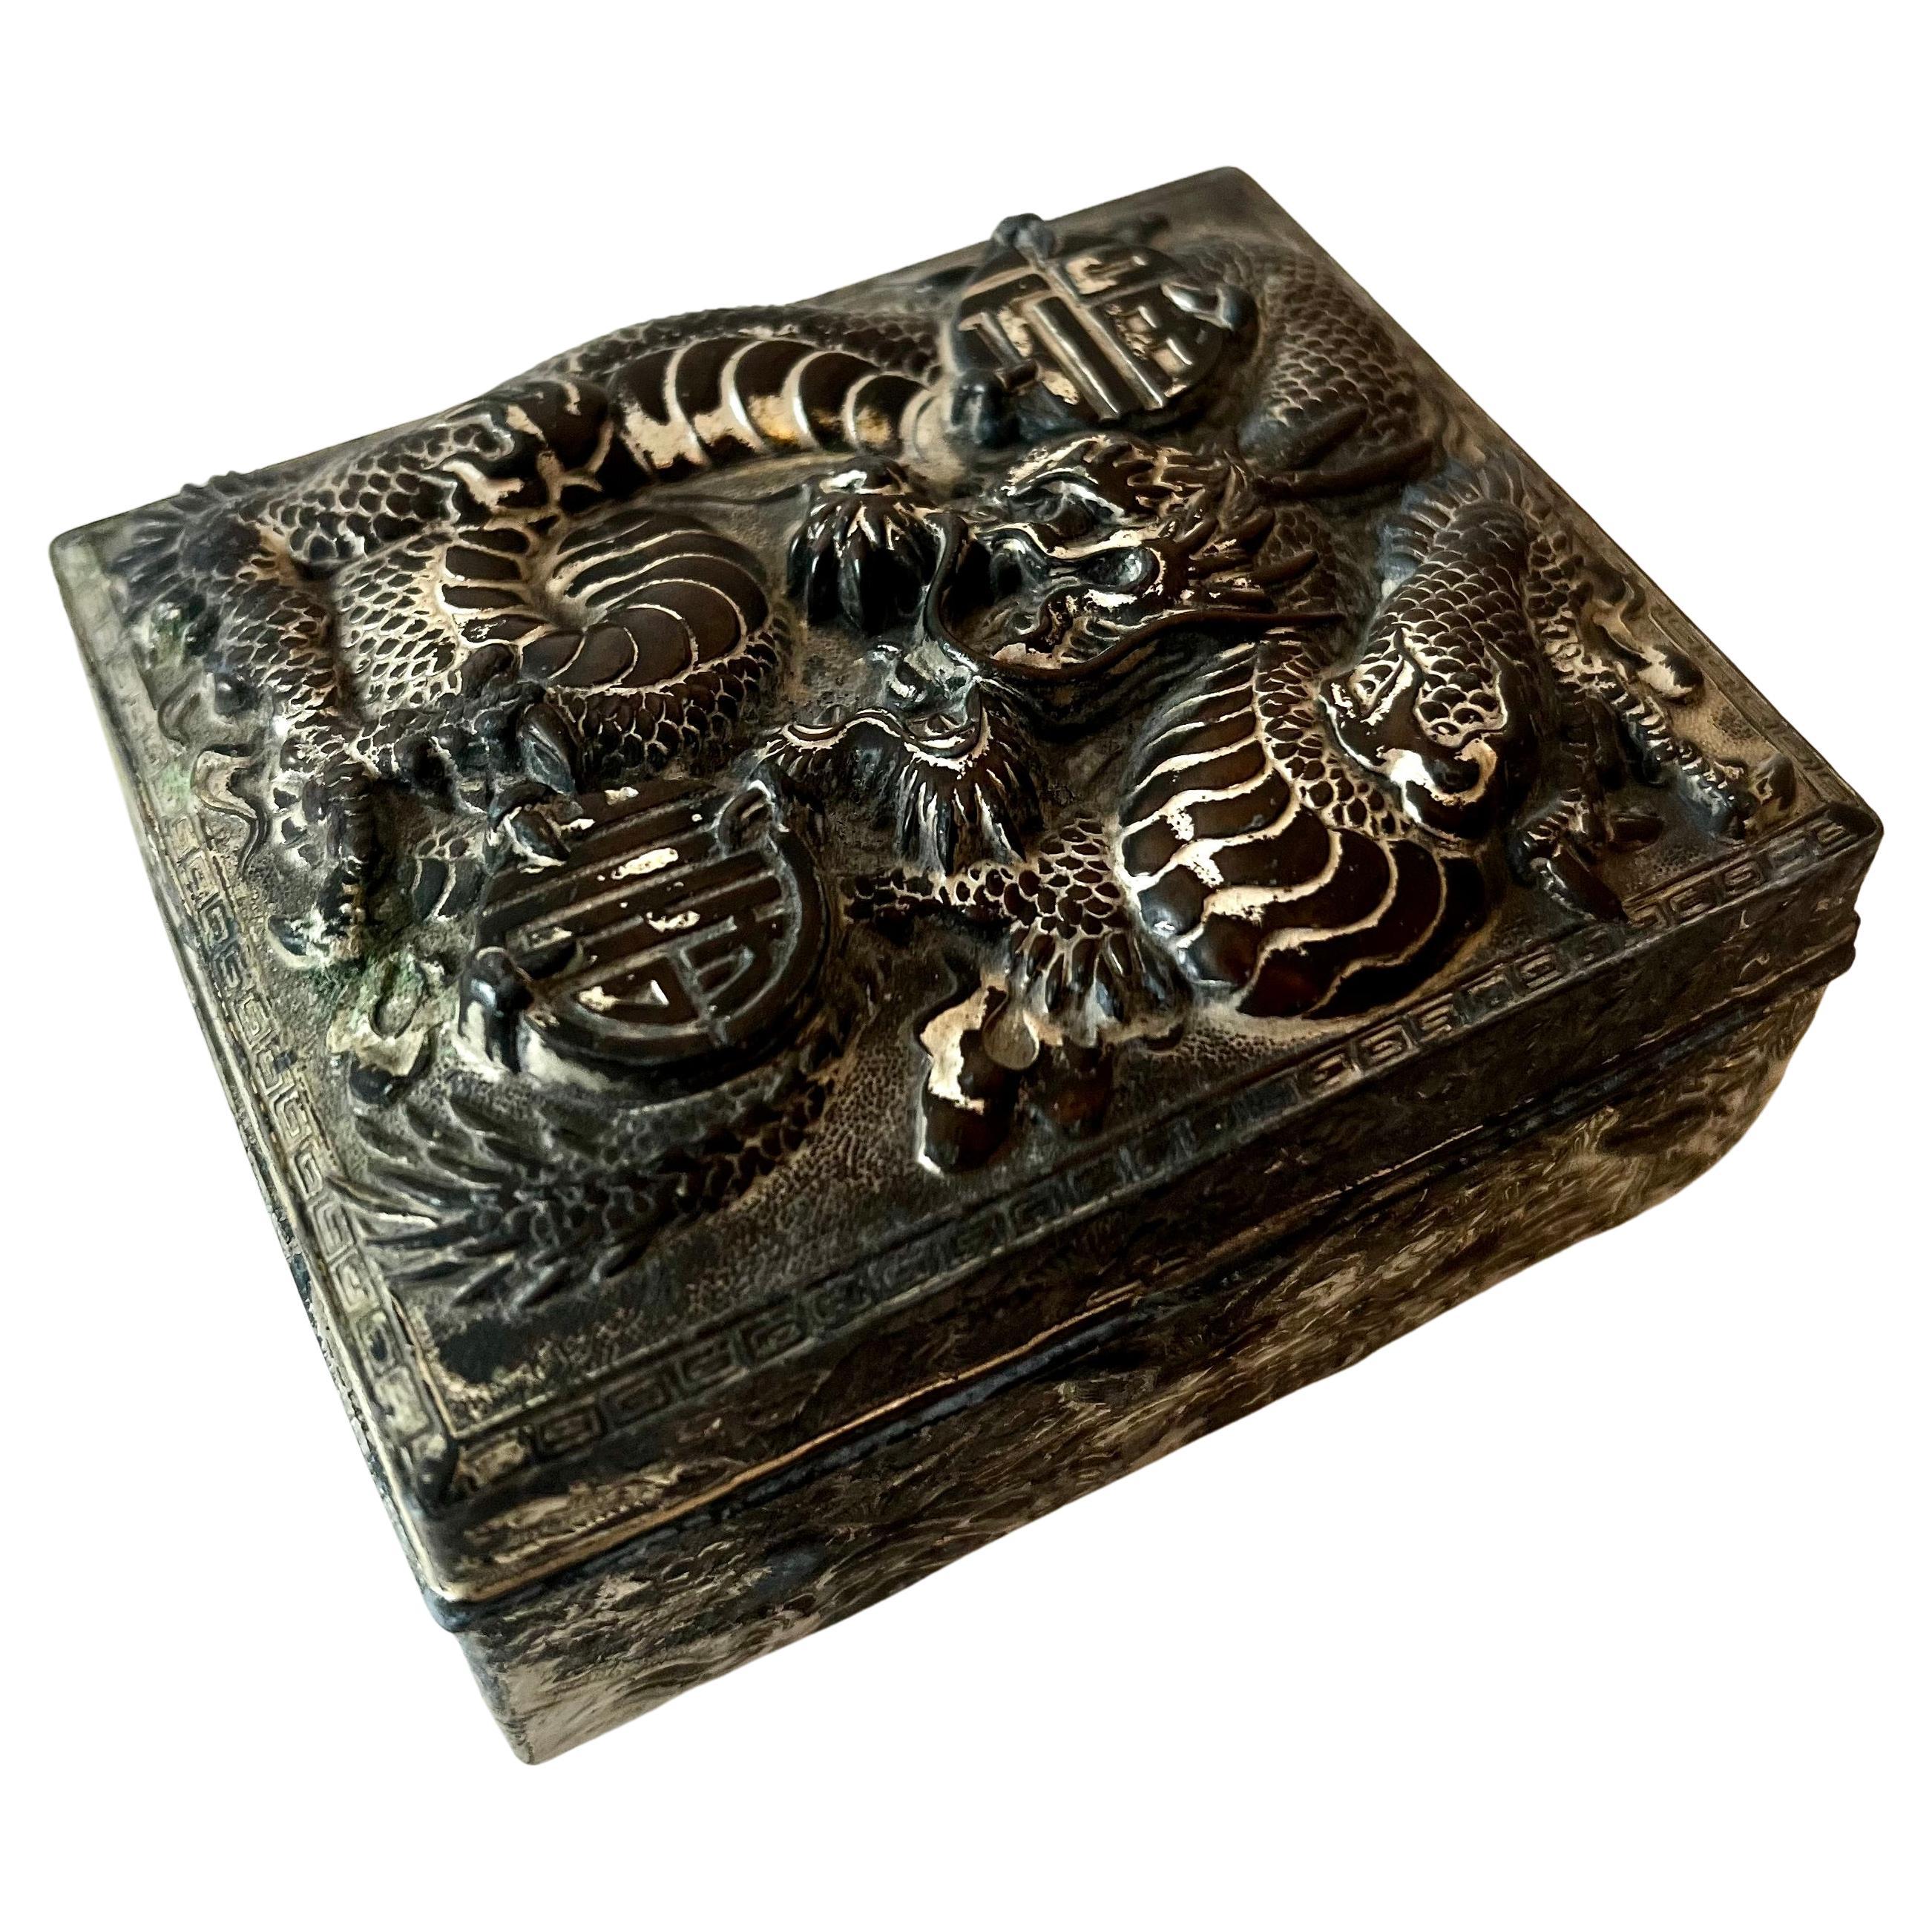 Asian Repousse Lidded box with Wooden Interior For Sale